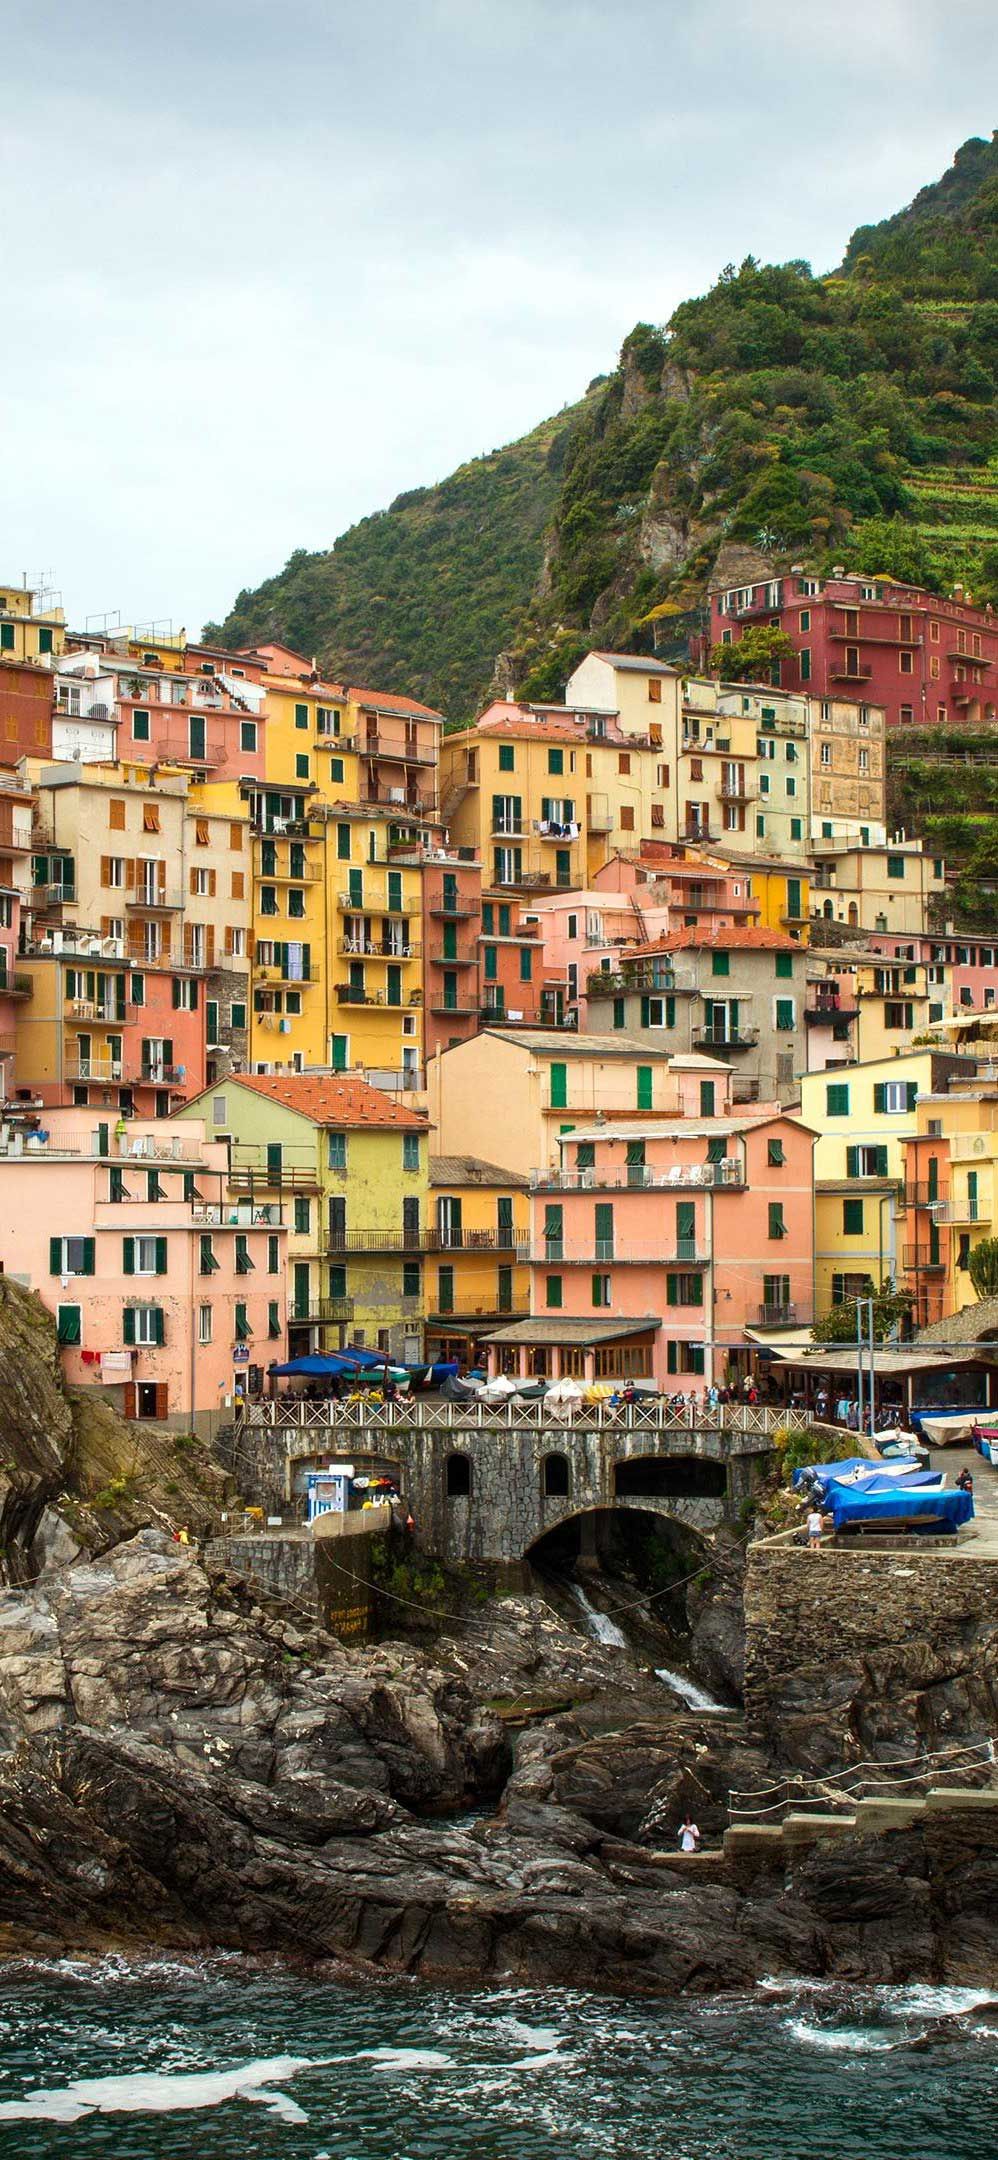 iPhone Wallpaper Cinque Terre Italy Villages K Desktop Wallpaper HD. Cinque terre italy, Florence travel, Italy villages